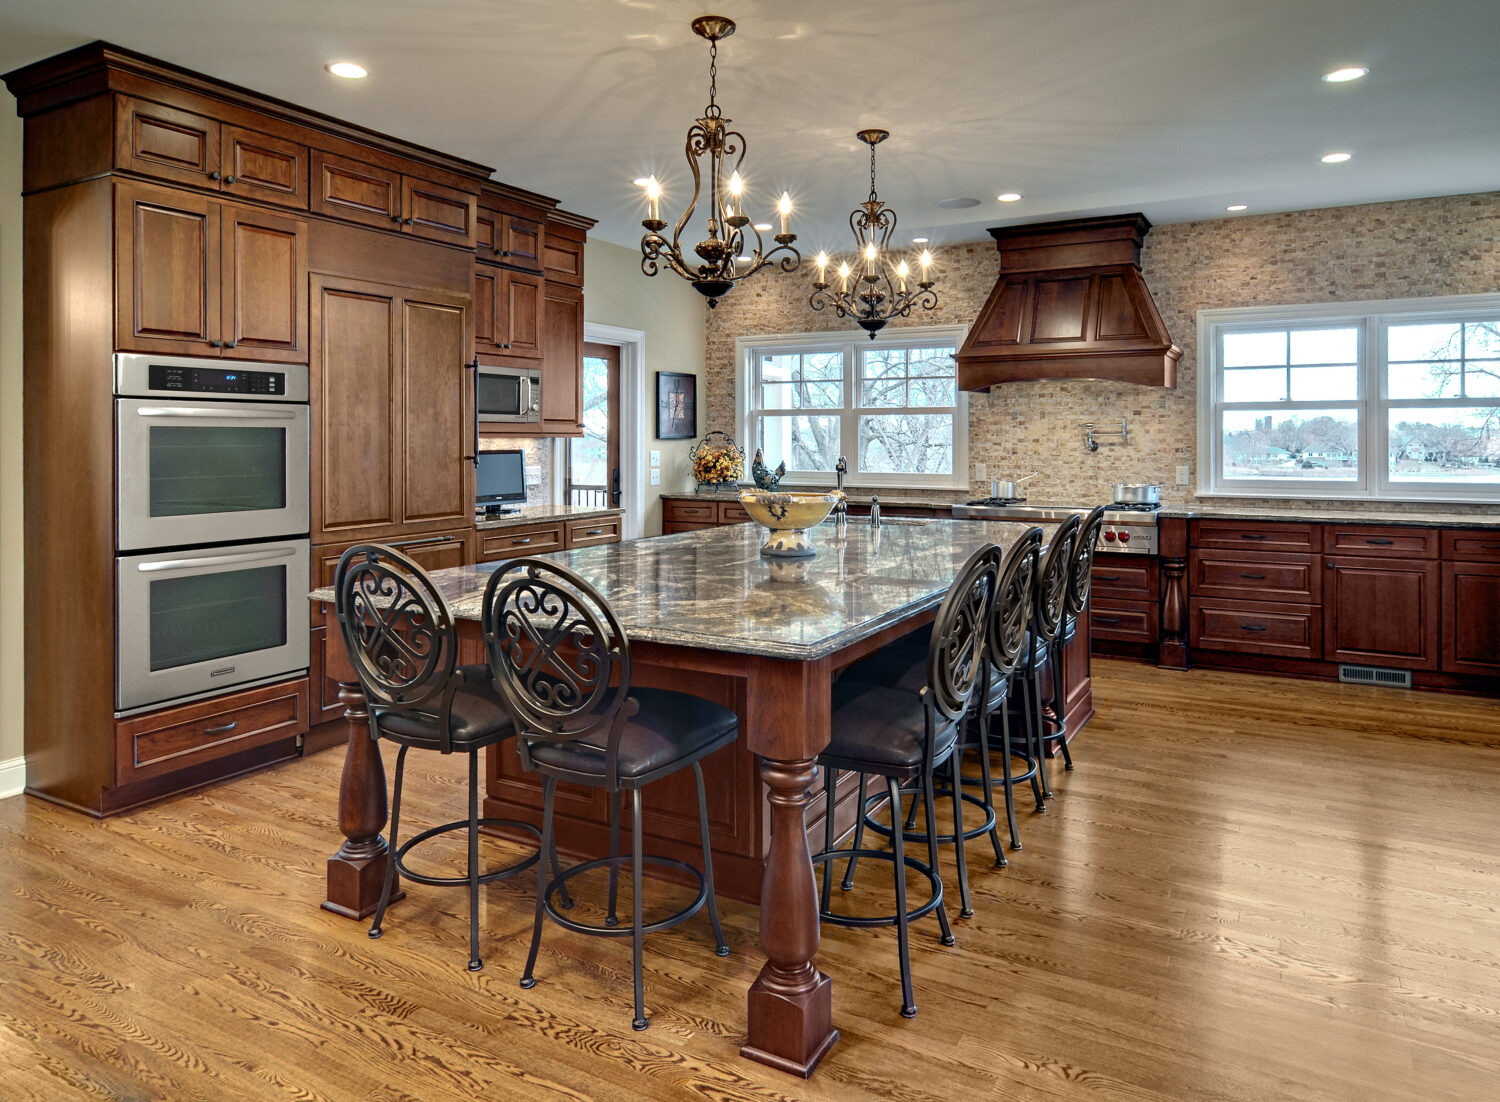 A Grand Kitchen Island is The Perfect Fit for this Kitchen